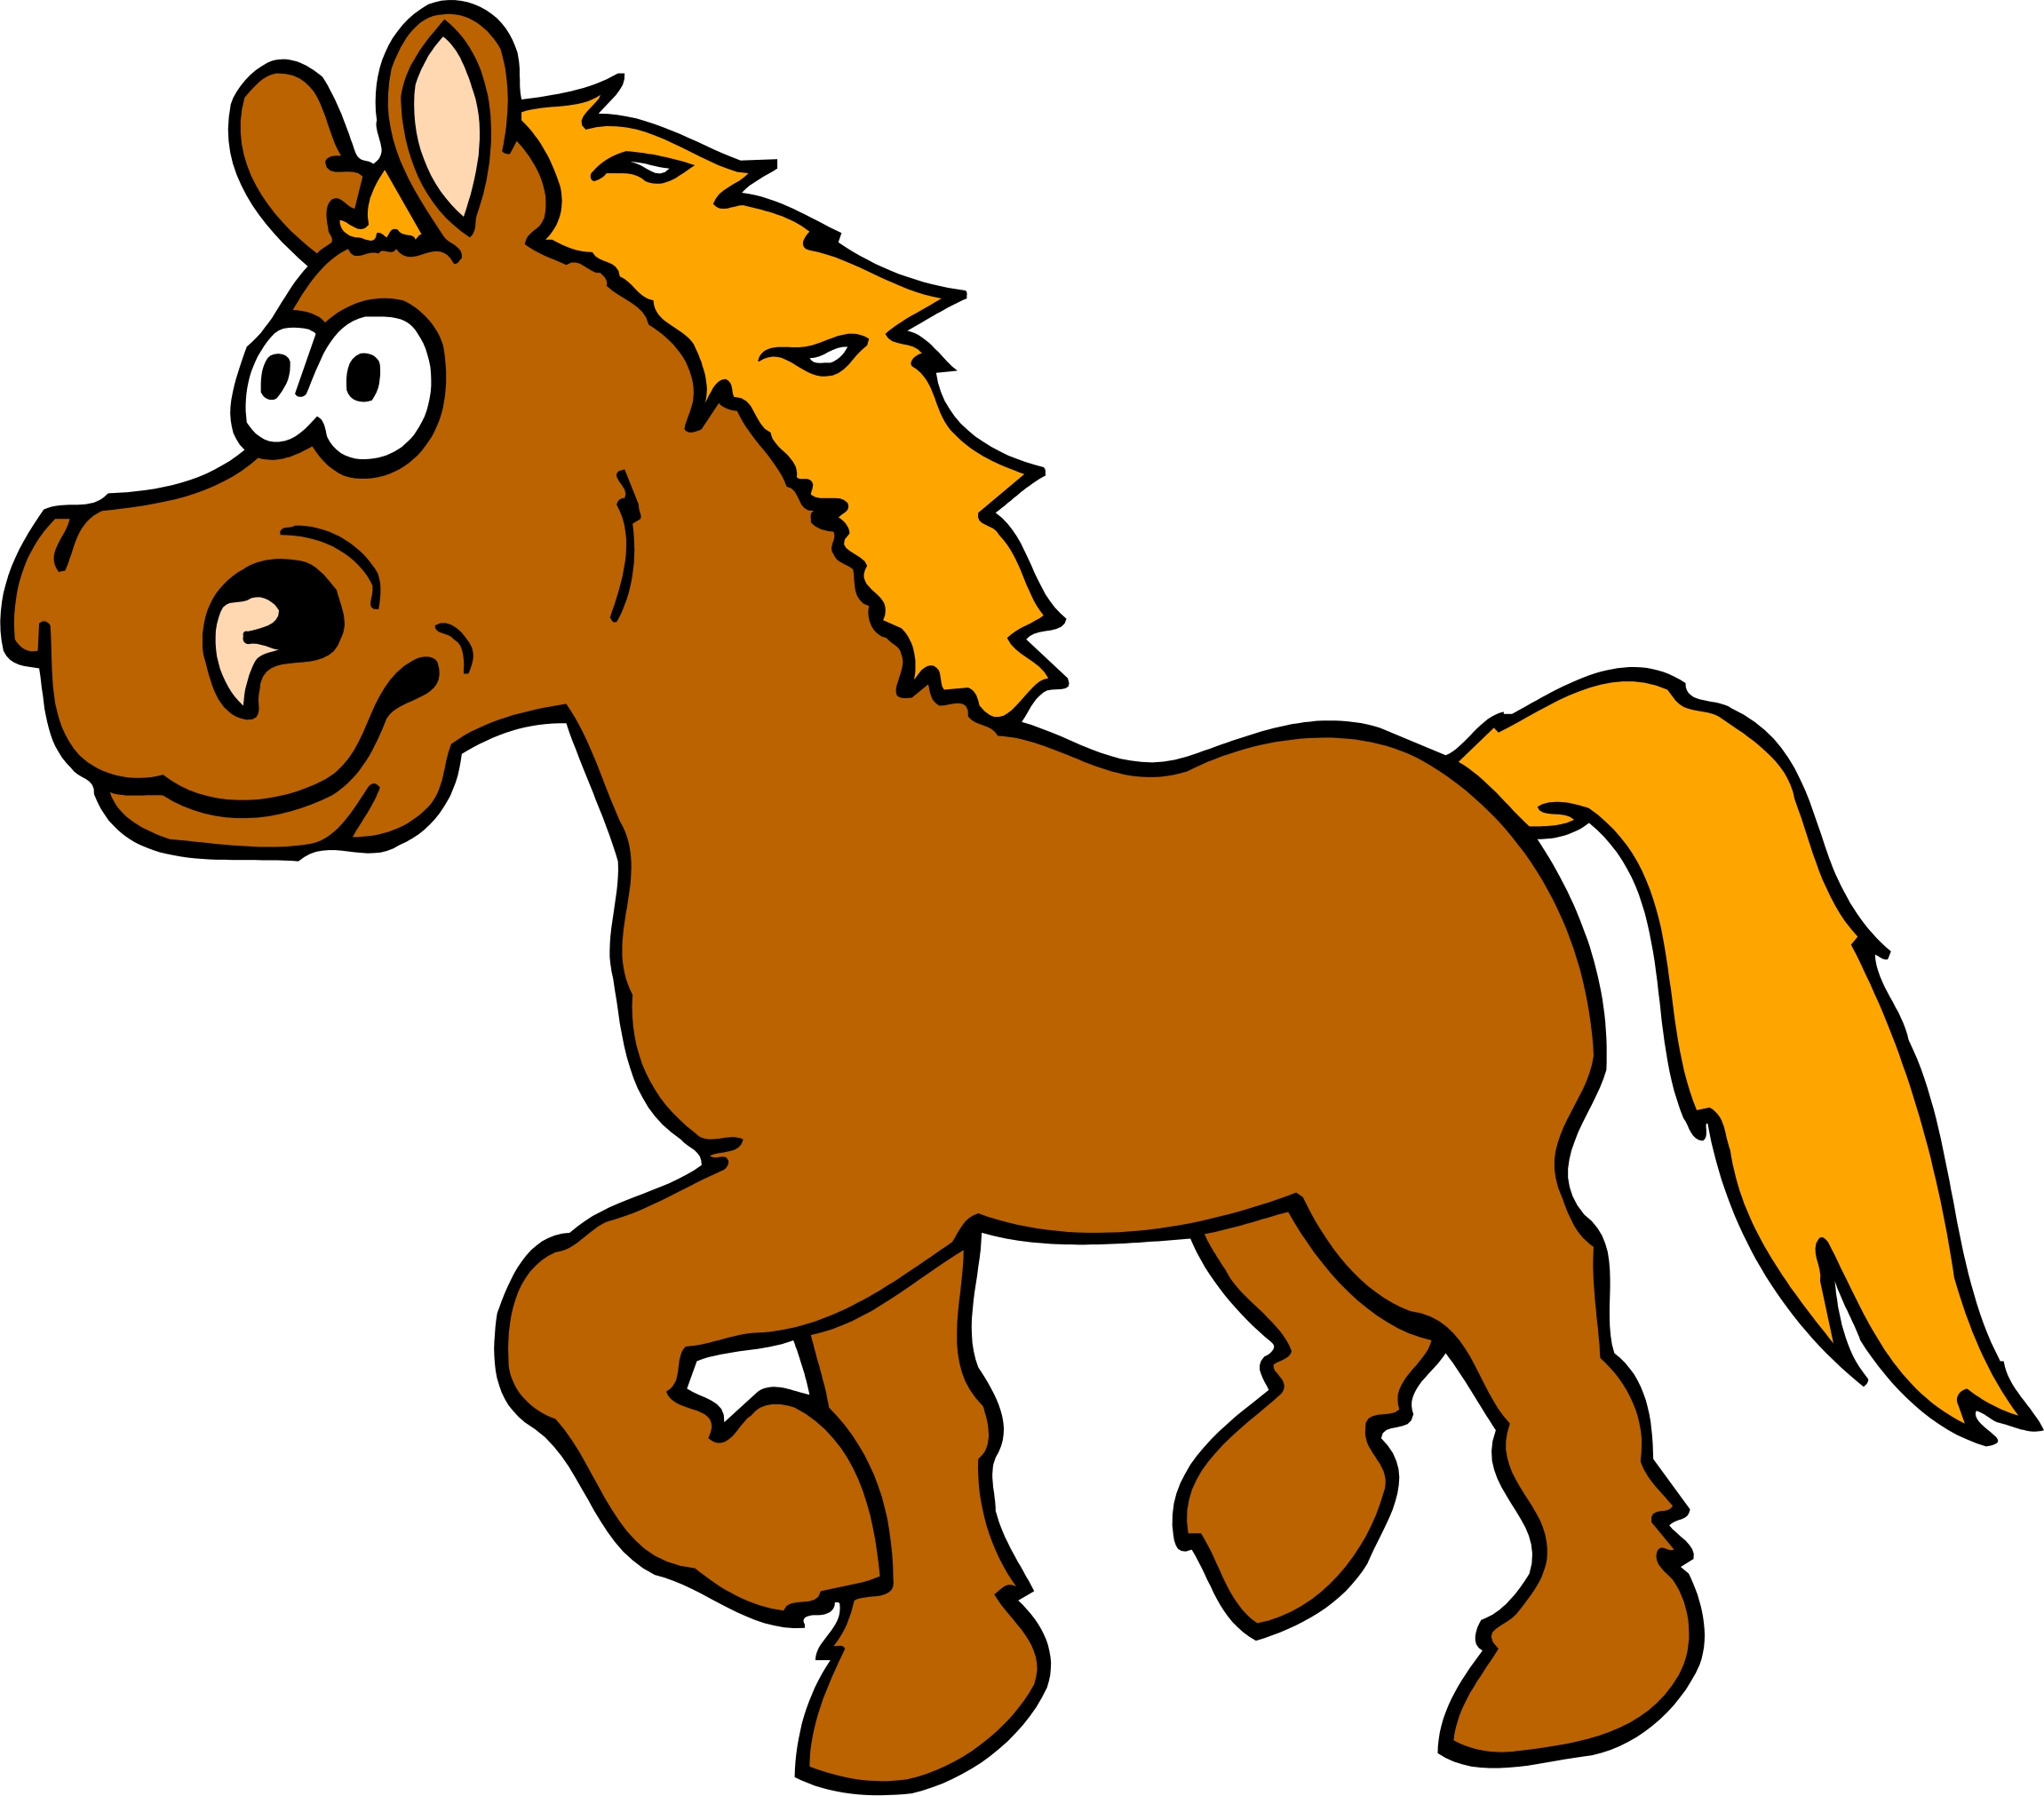 Pictures Of Cartoon Horses - ClipArt Best